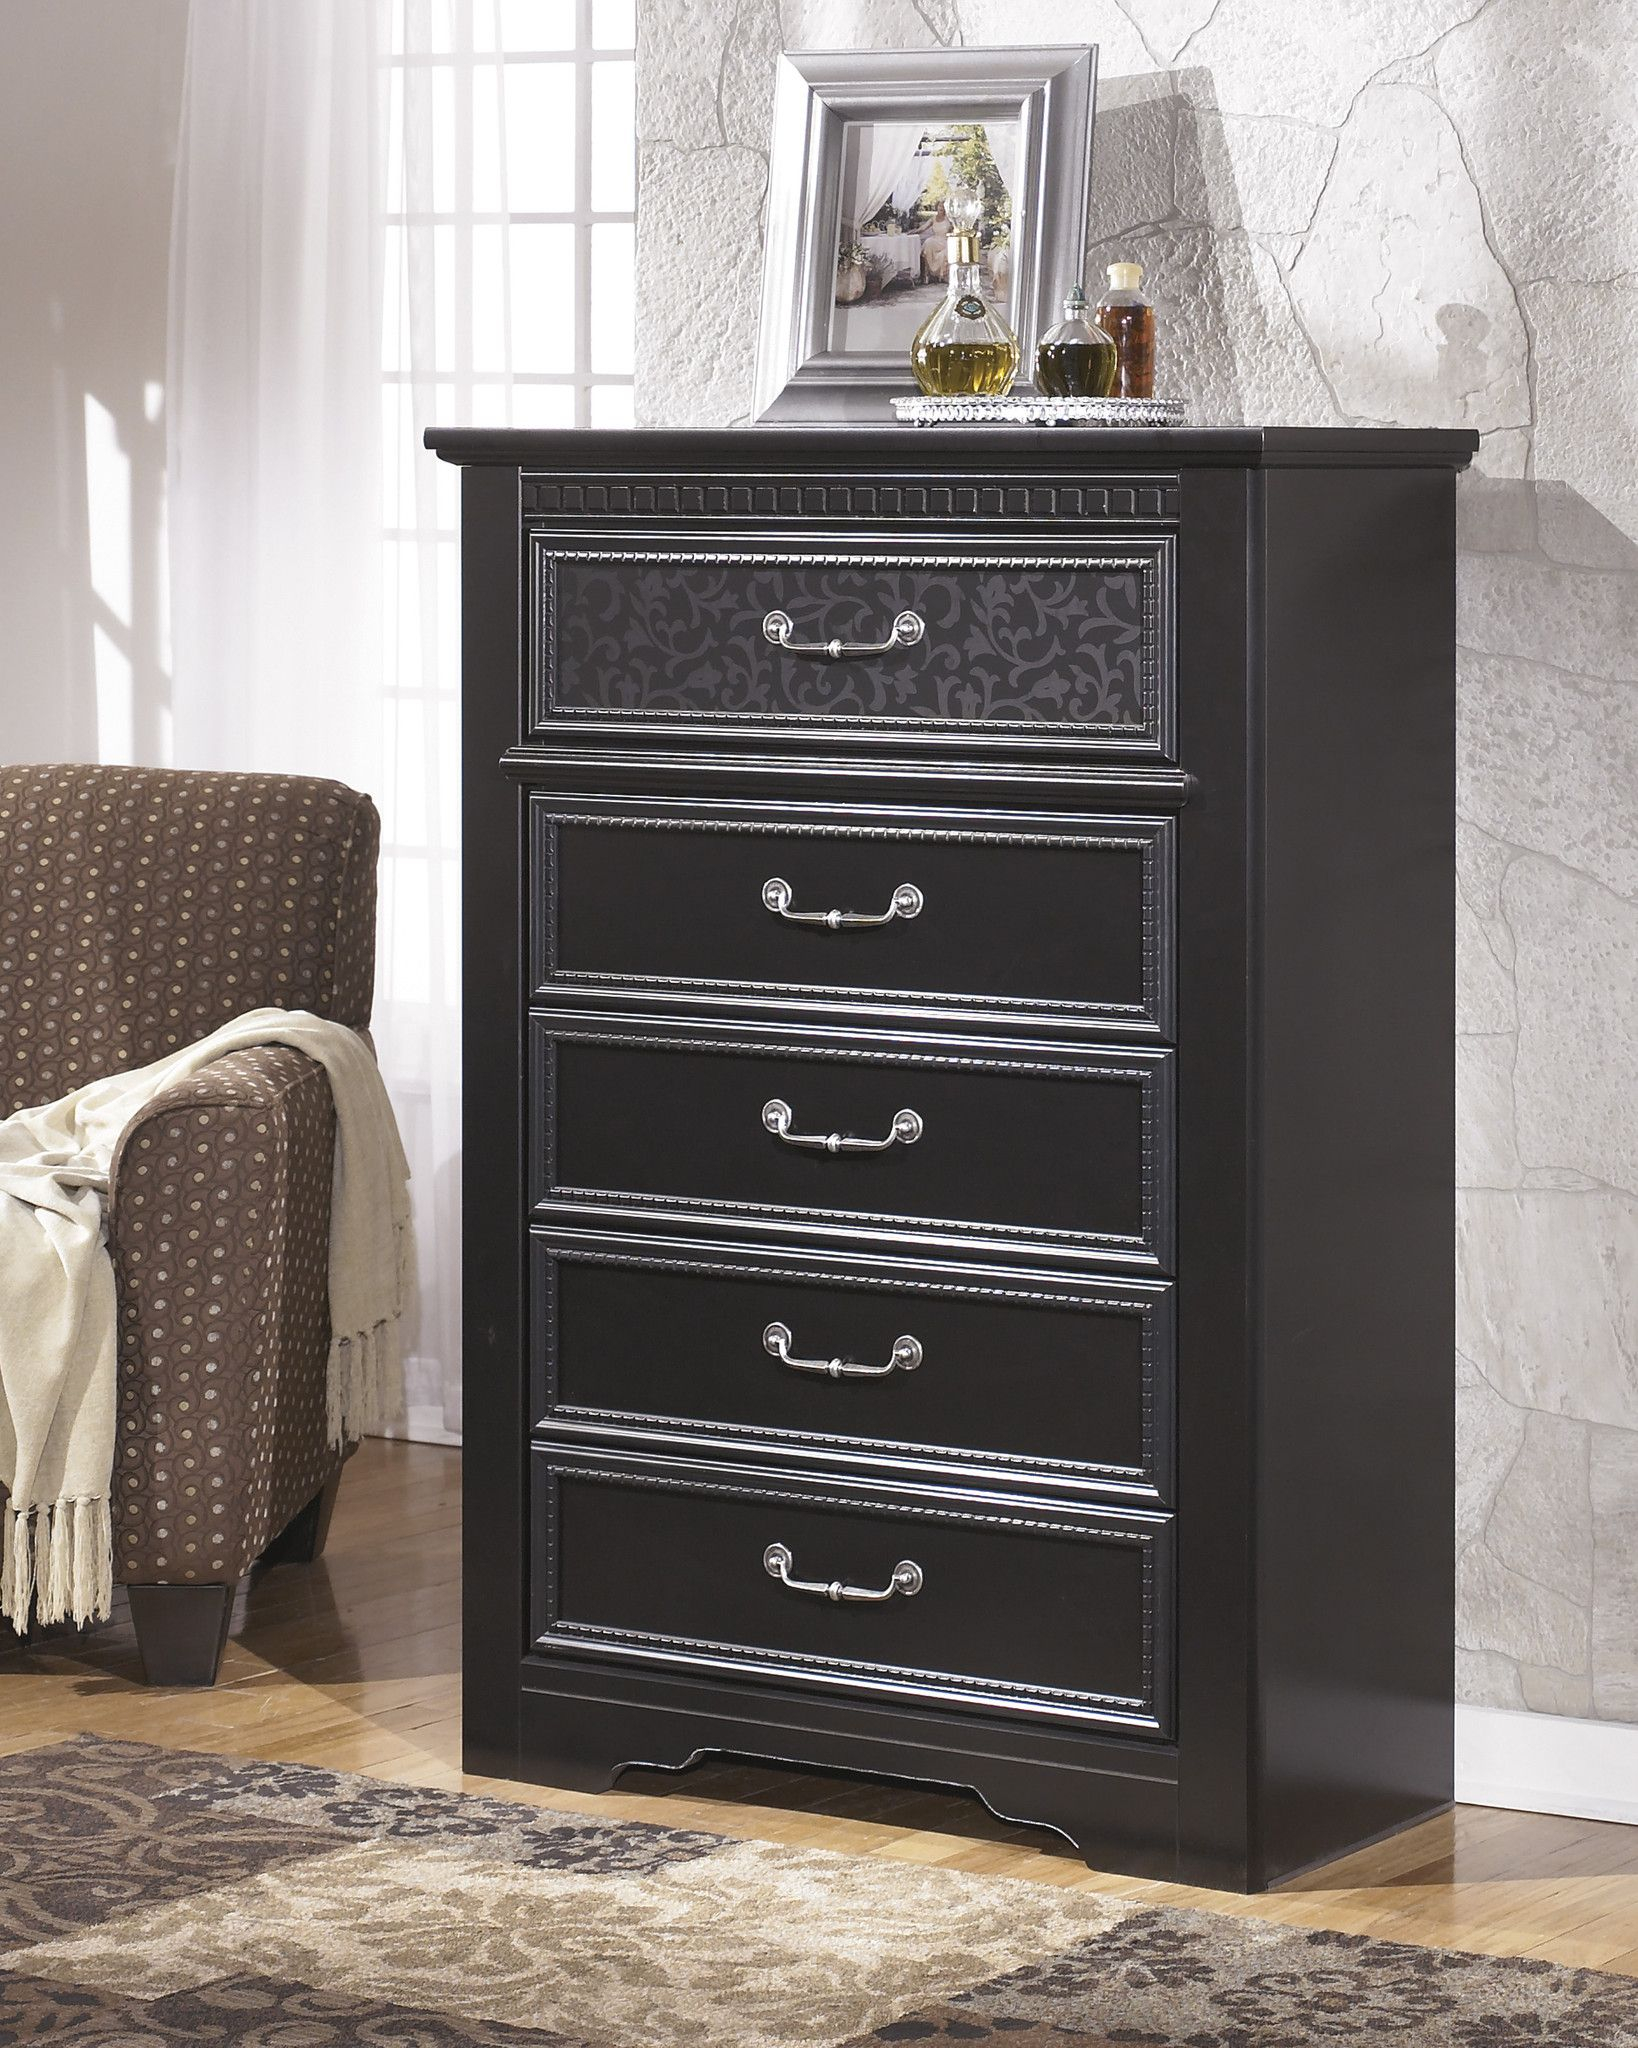 Cavallino Chest Want Furniture Home Decor Furniture Chest Of with regard to size 1638 X 2048